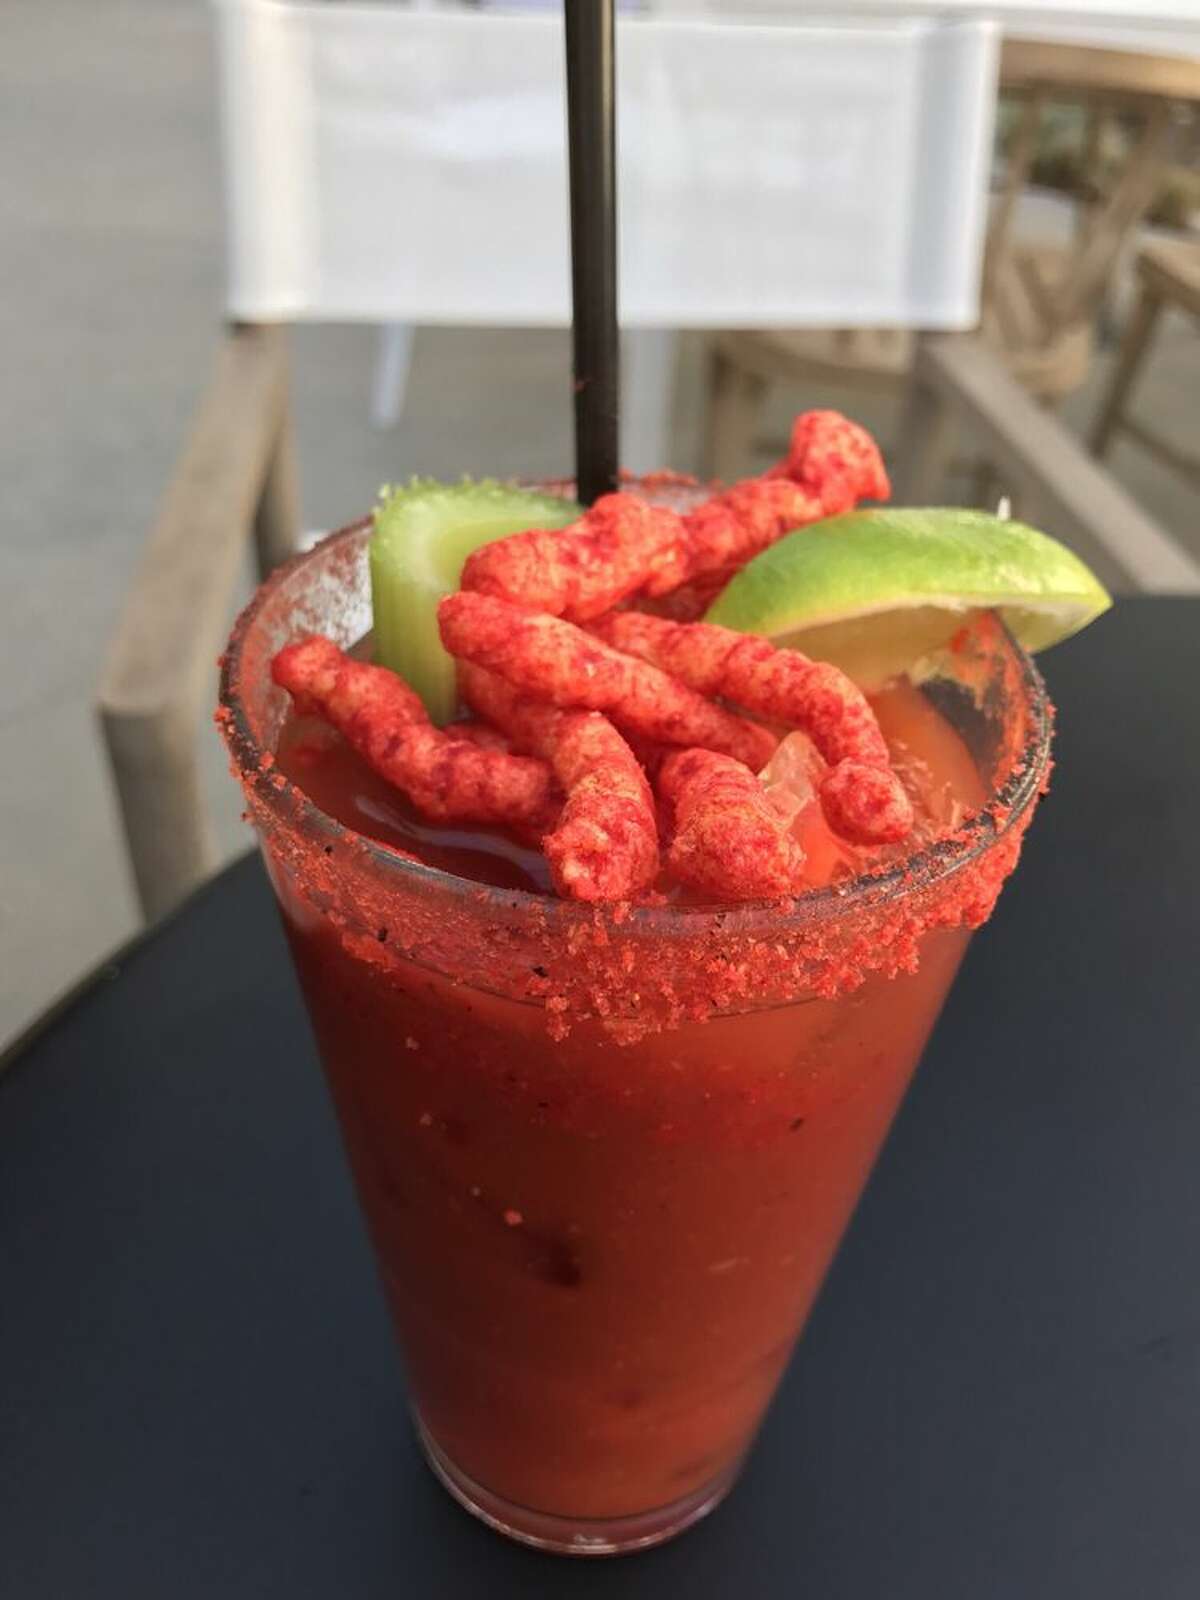 Can't get enough of Flamin' Hot Cheetos? An Irvine-based bar is making sure you get your fill of the chip with its Flamin' Hot Cheetos Bloody Mary.